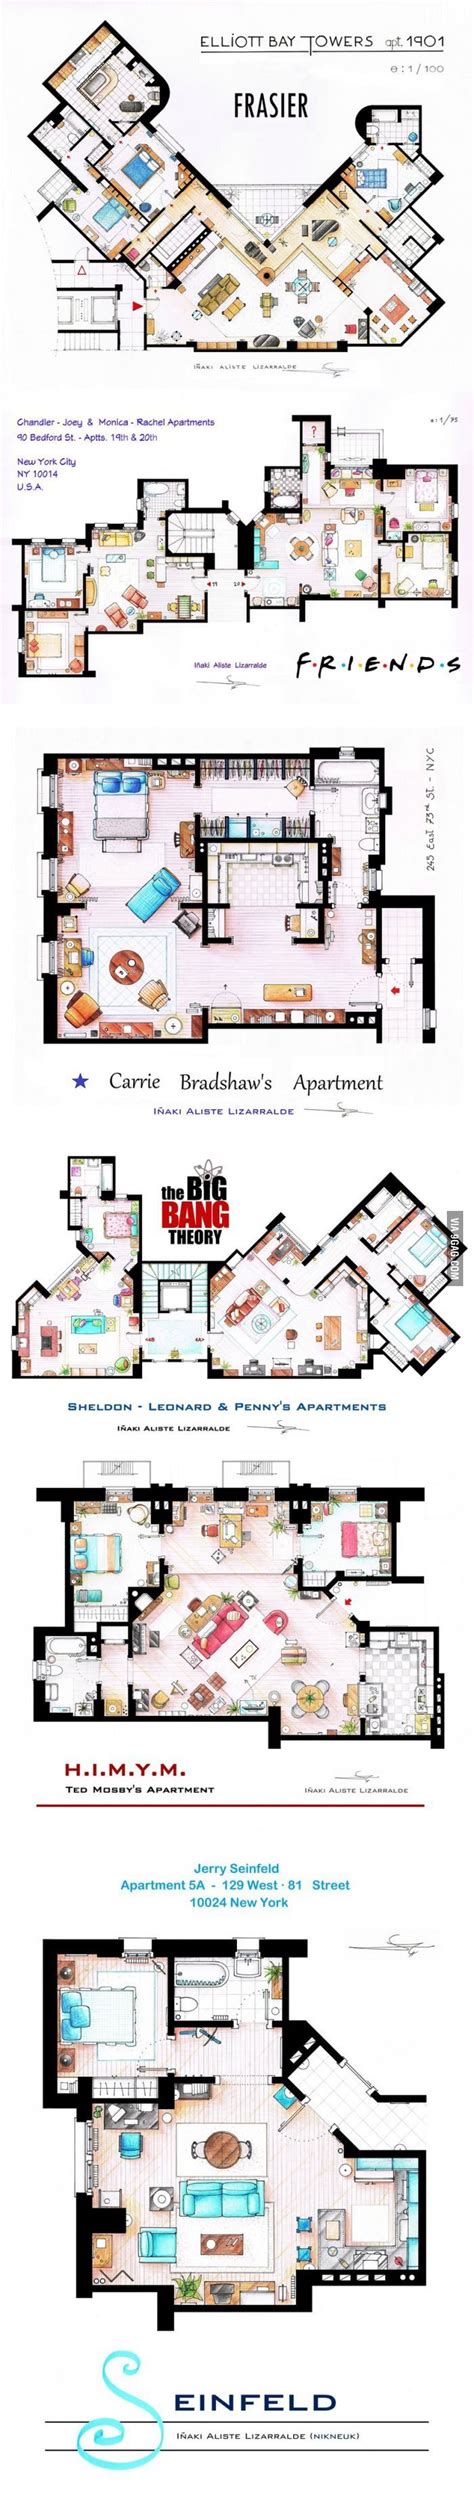 Floor Plans From Some Tv Series Sims Floor Plans How To Plan